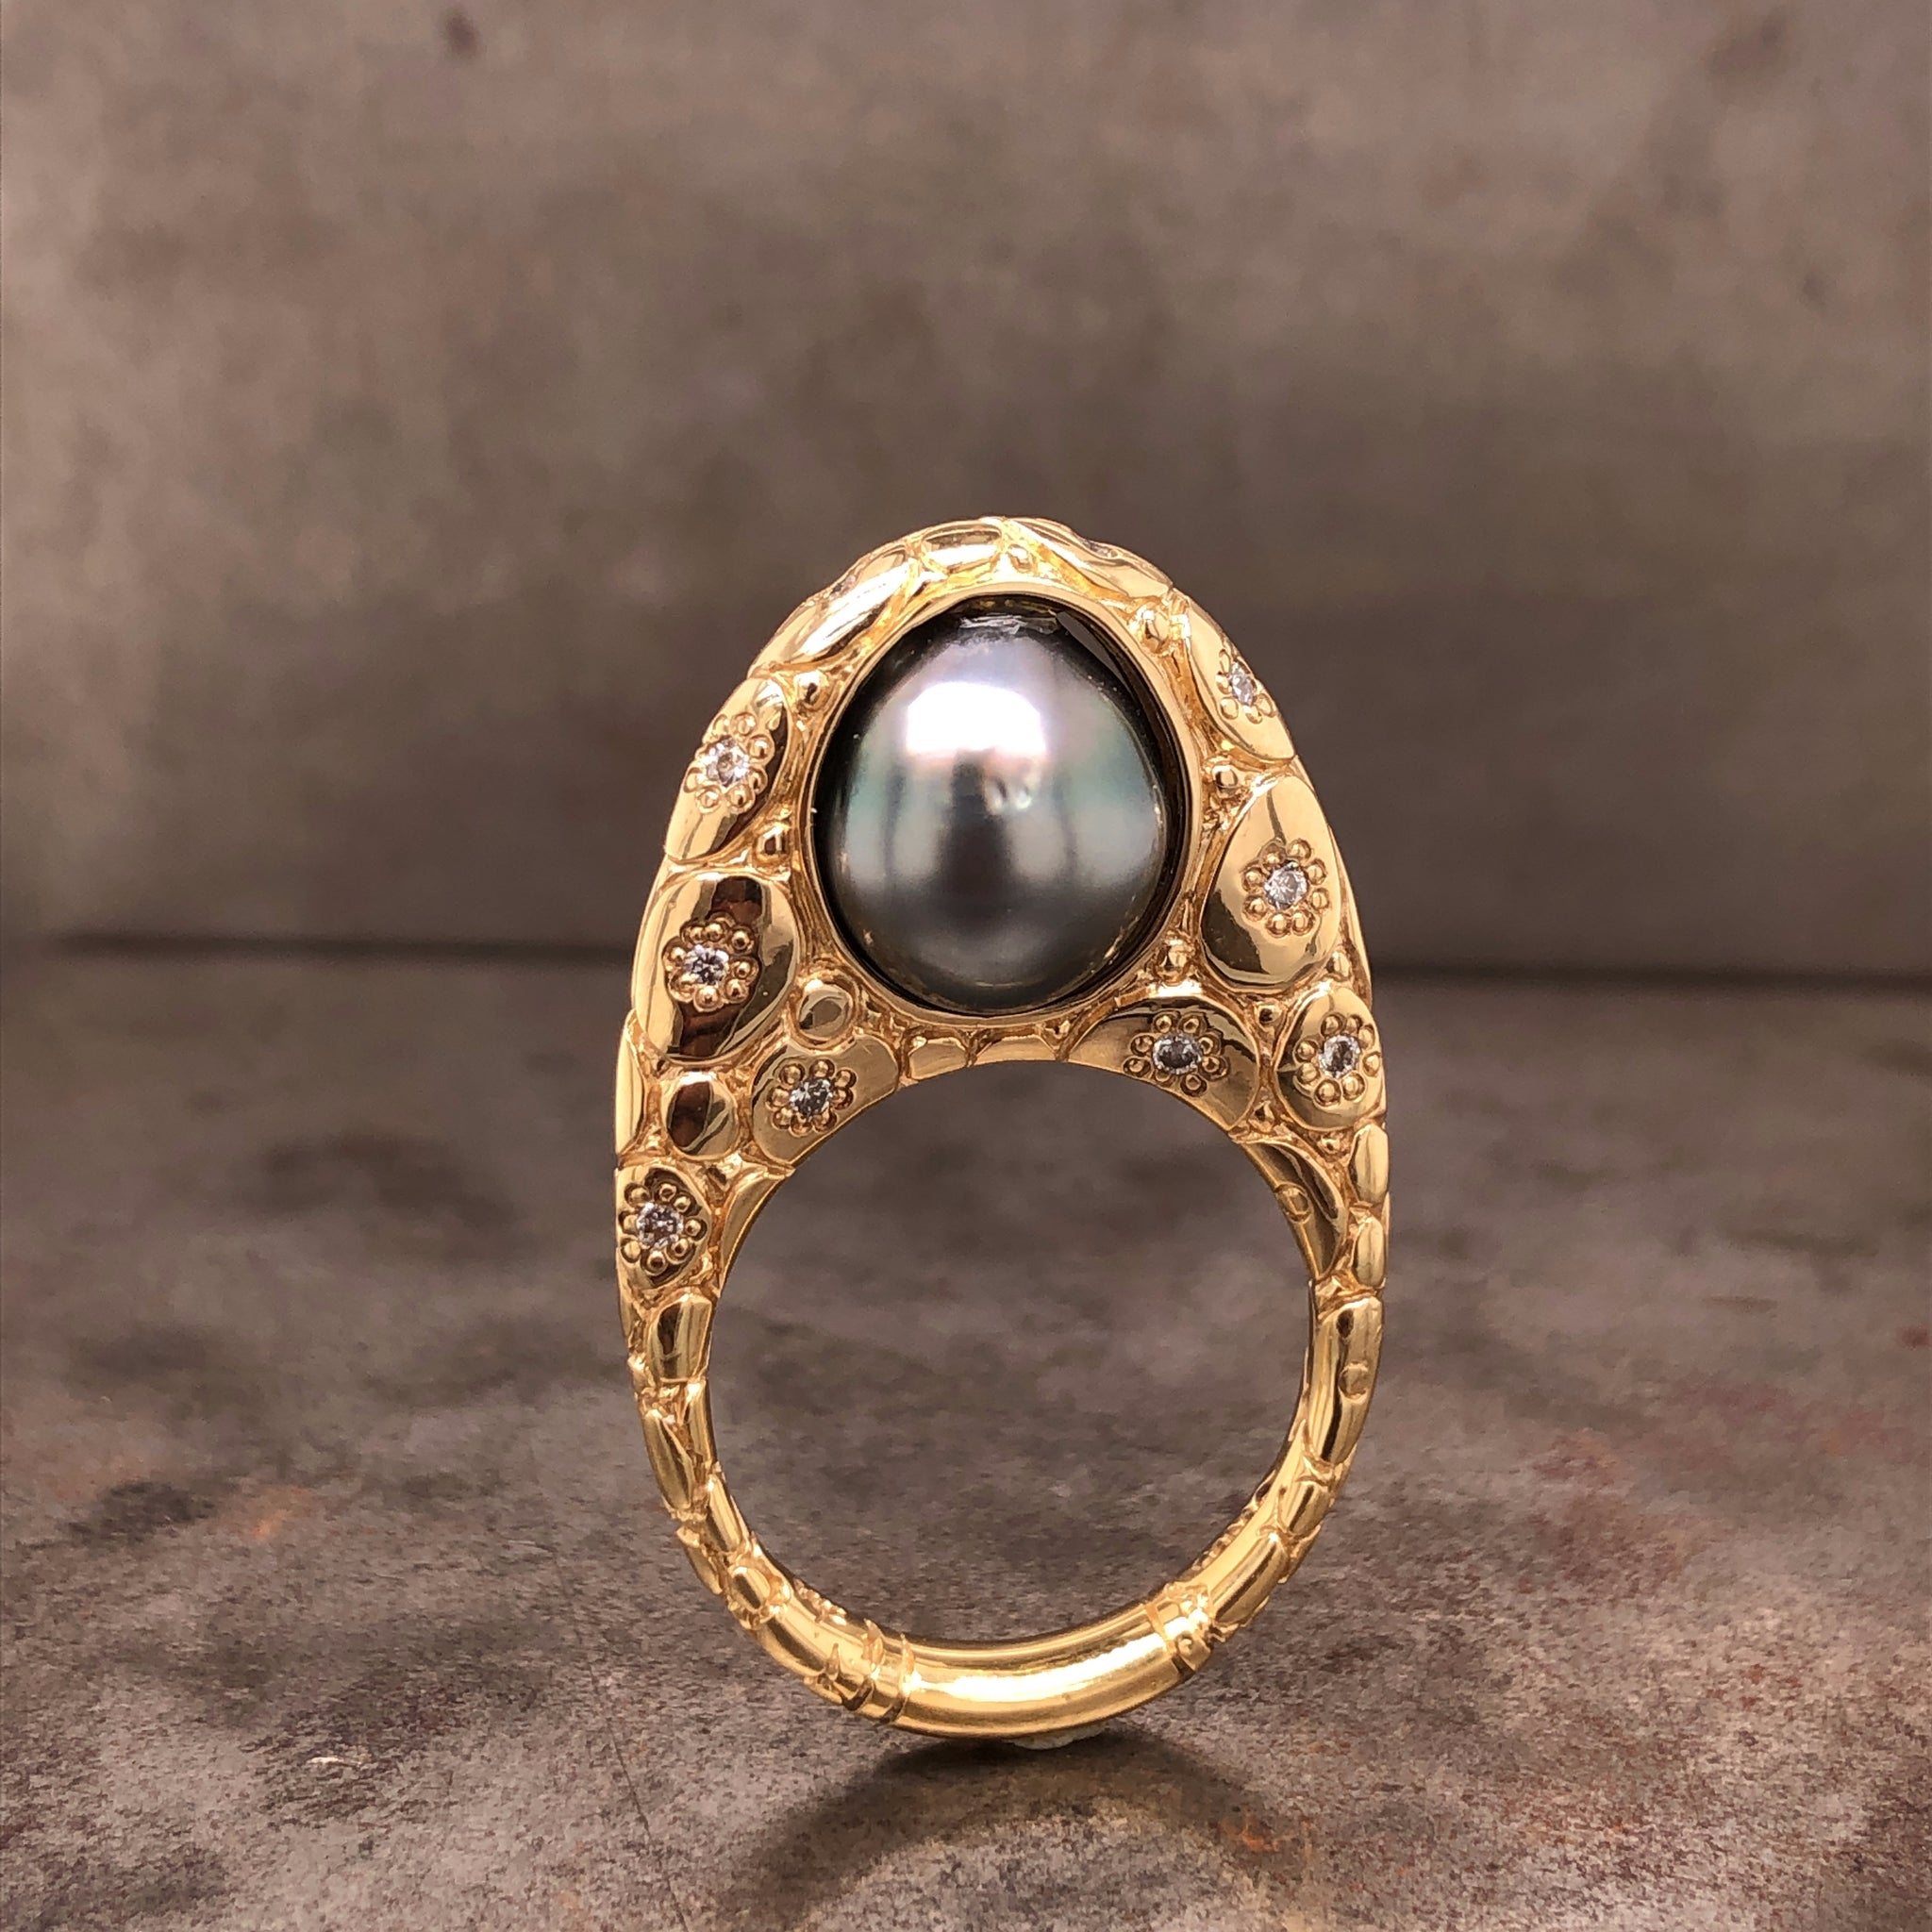 Full view of ring standing up. Ring profile looks like an egg, the opening for the ring is positioned near the bottom of the egg. Set in the center of the ring is a black Tahitian Pearl. This pearl is encompassed with gold. The rest of the egg mounting features carved portions resembling a cobblestone walkway and round brilliant diamonds scattered around the mounting.